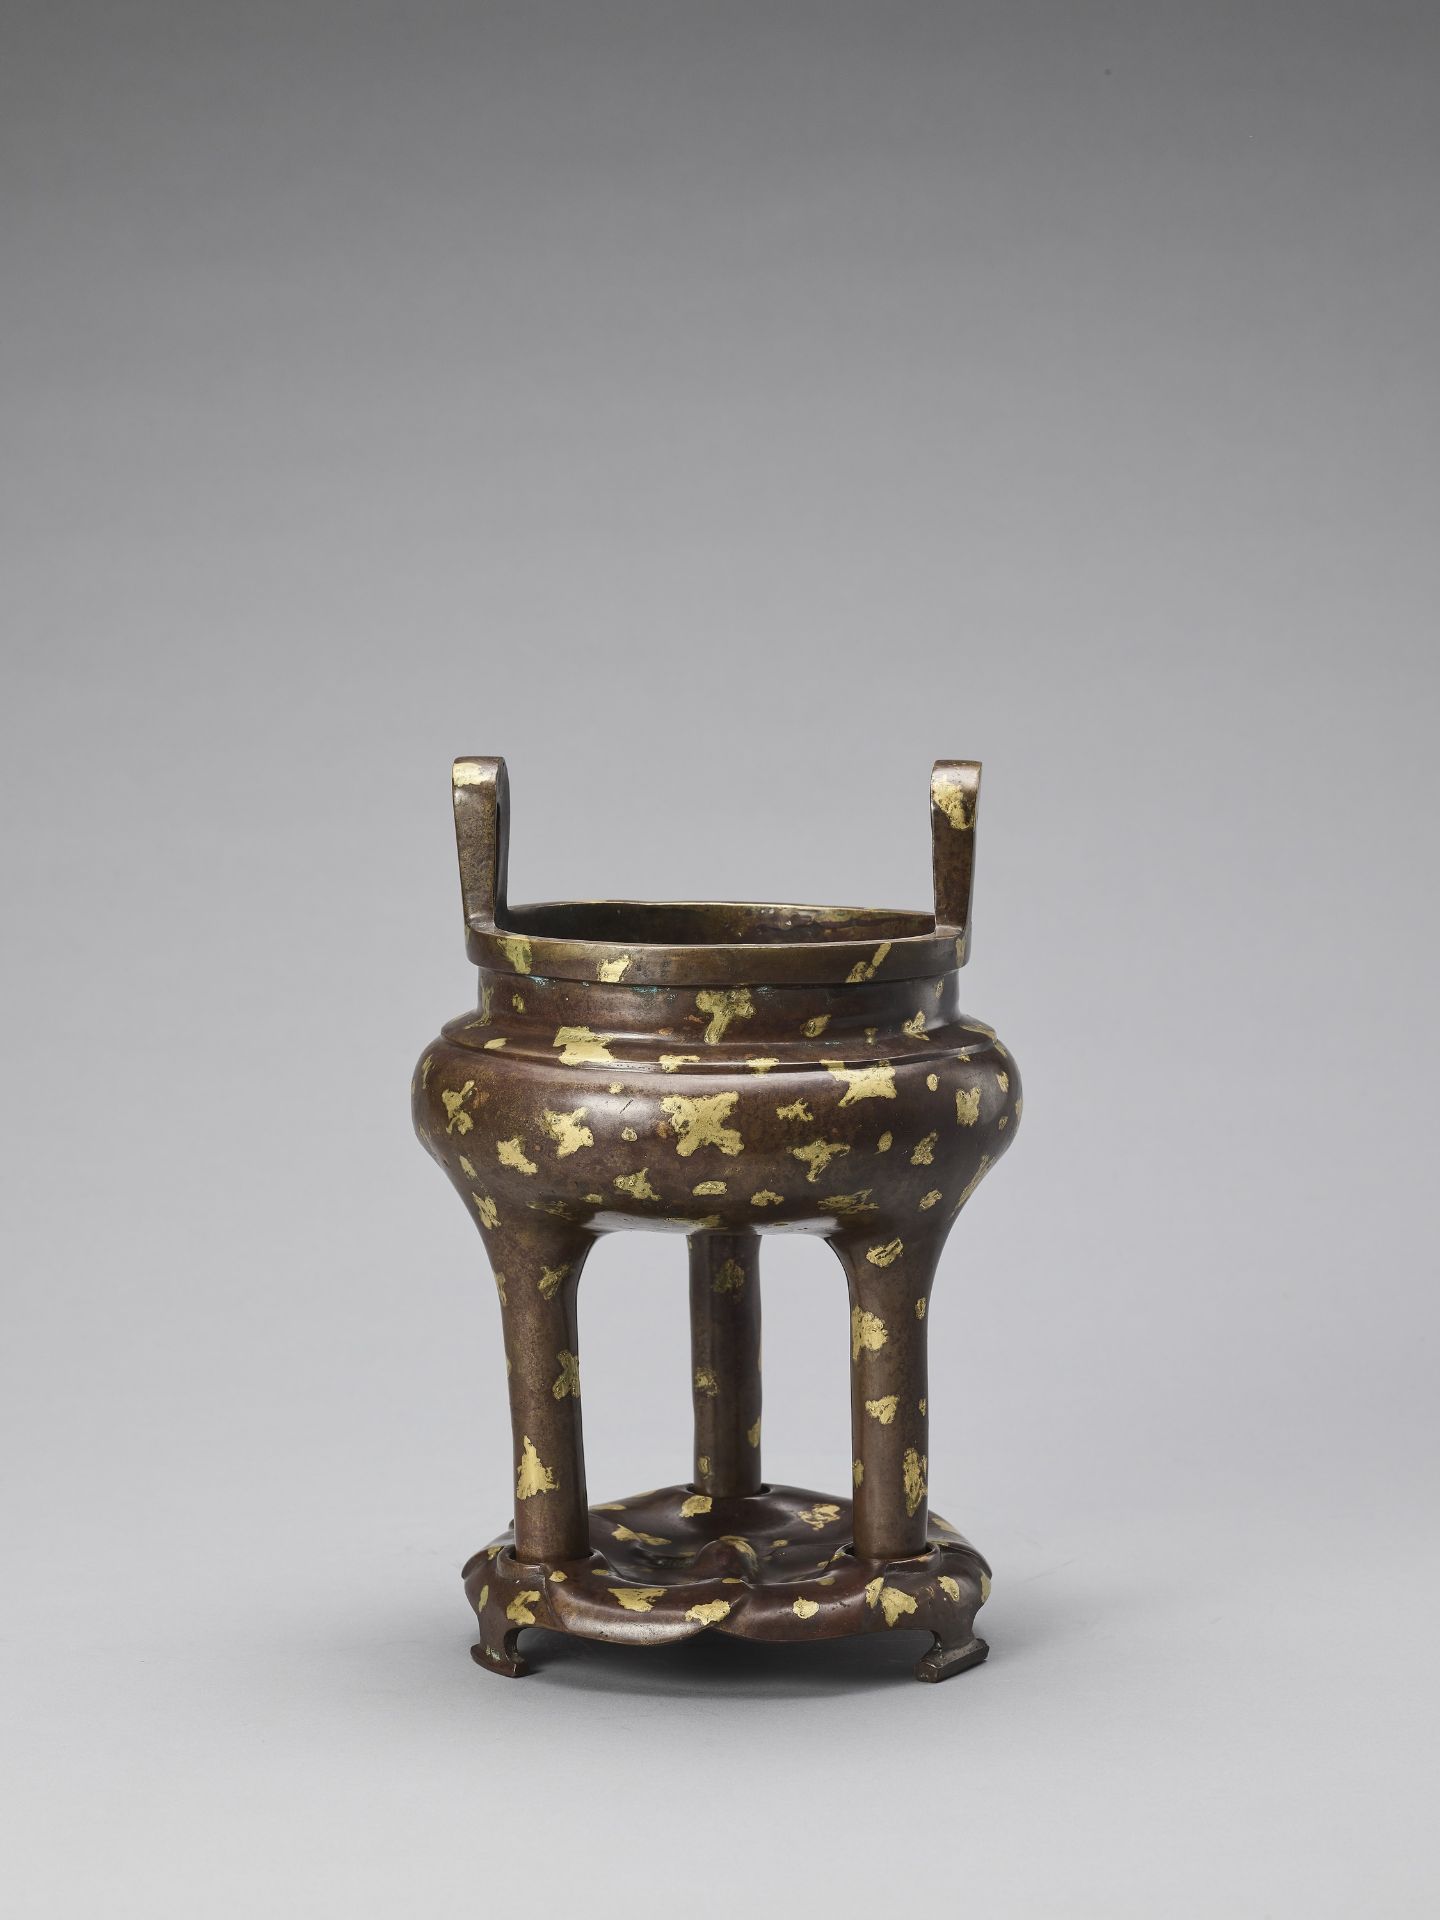 A GOLD-SPLASHED BRONZE TRIPOD CENSER WITH SIX-CHARACTER XUANDE MARK, QING - Image 5 of 8